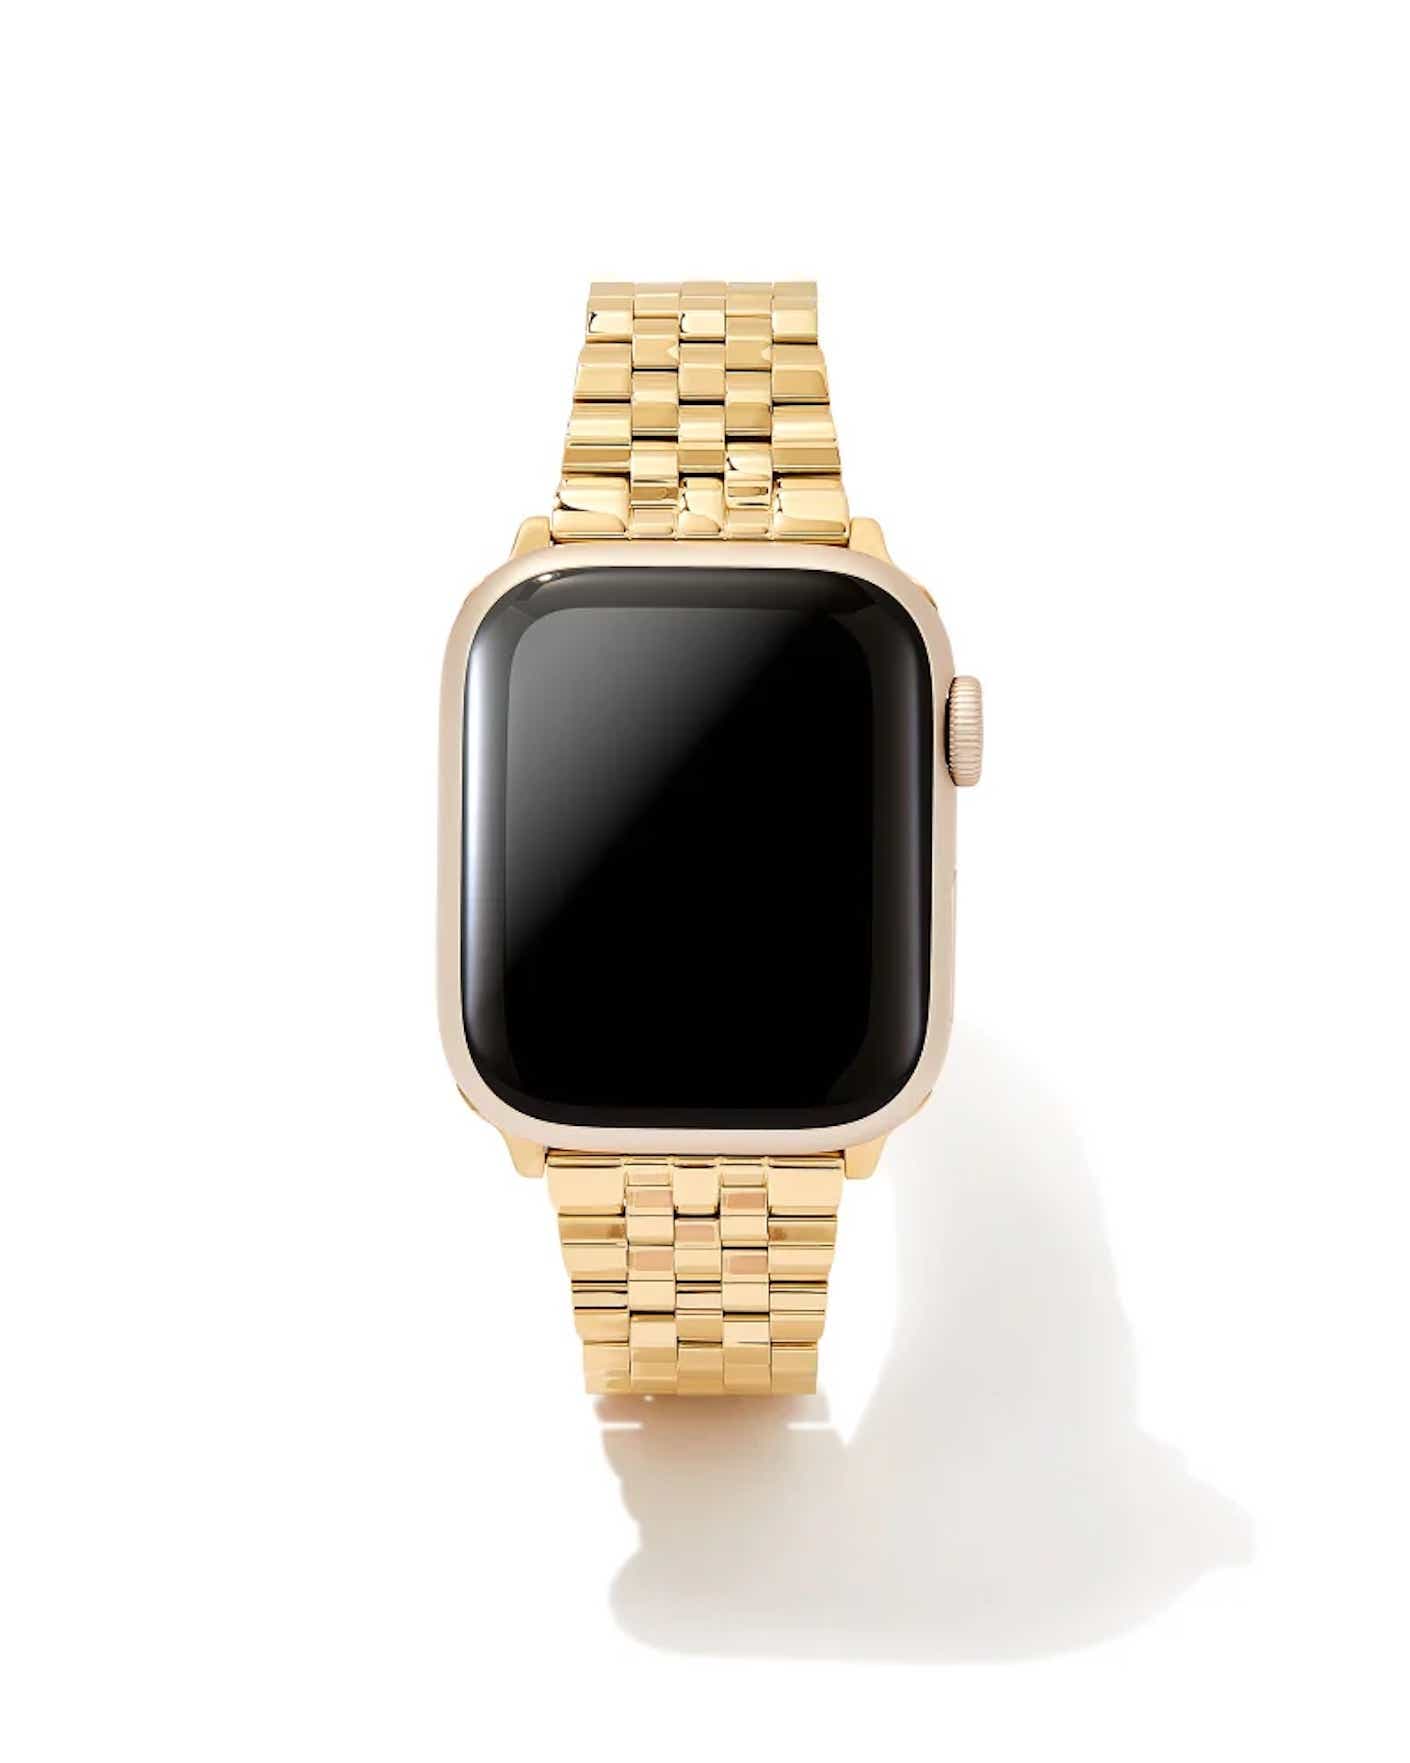 A gold 5 link watch band